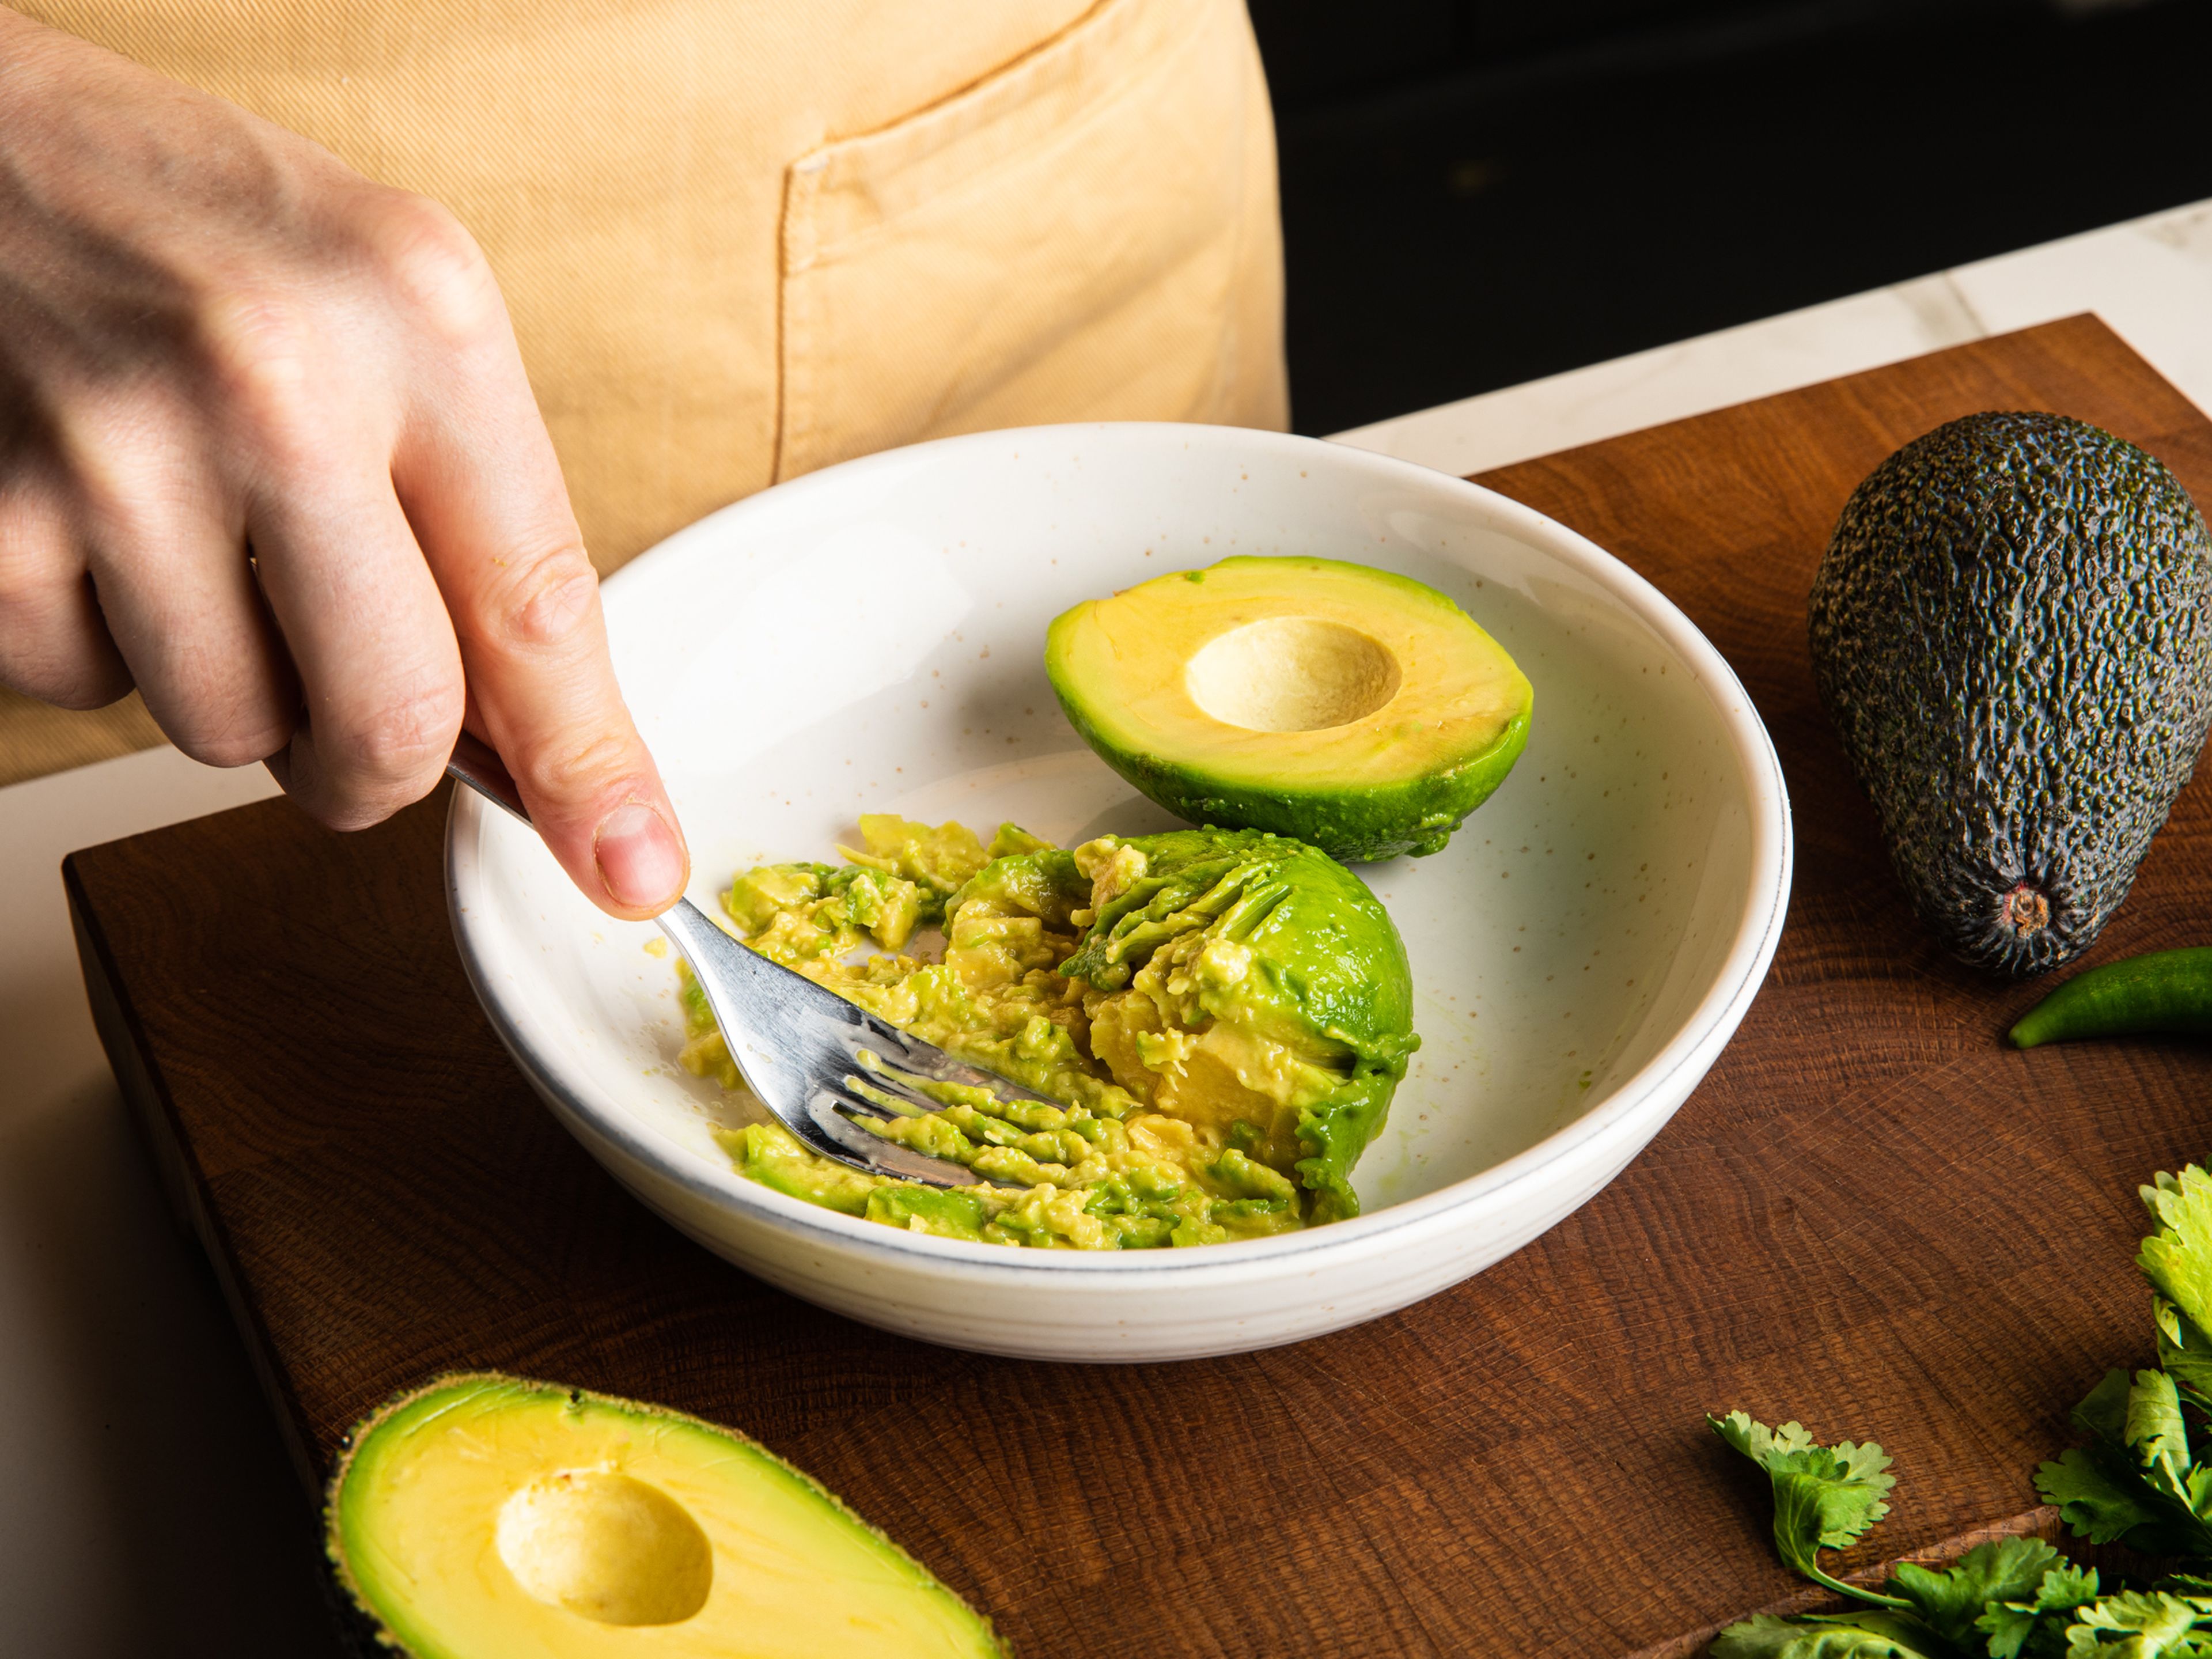 Halve the avocados, remove the pits and scoop out the avocado flesh into a mixing bowl.